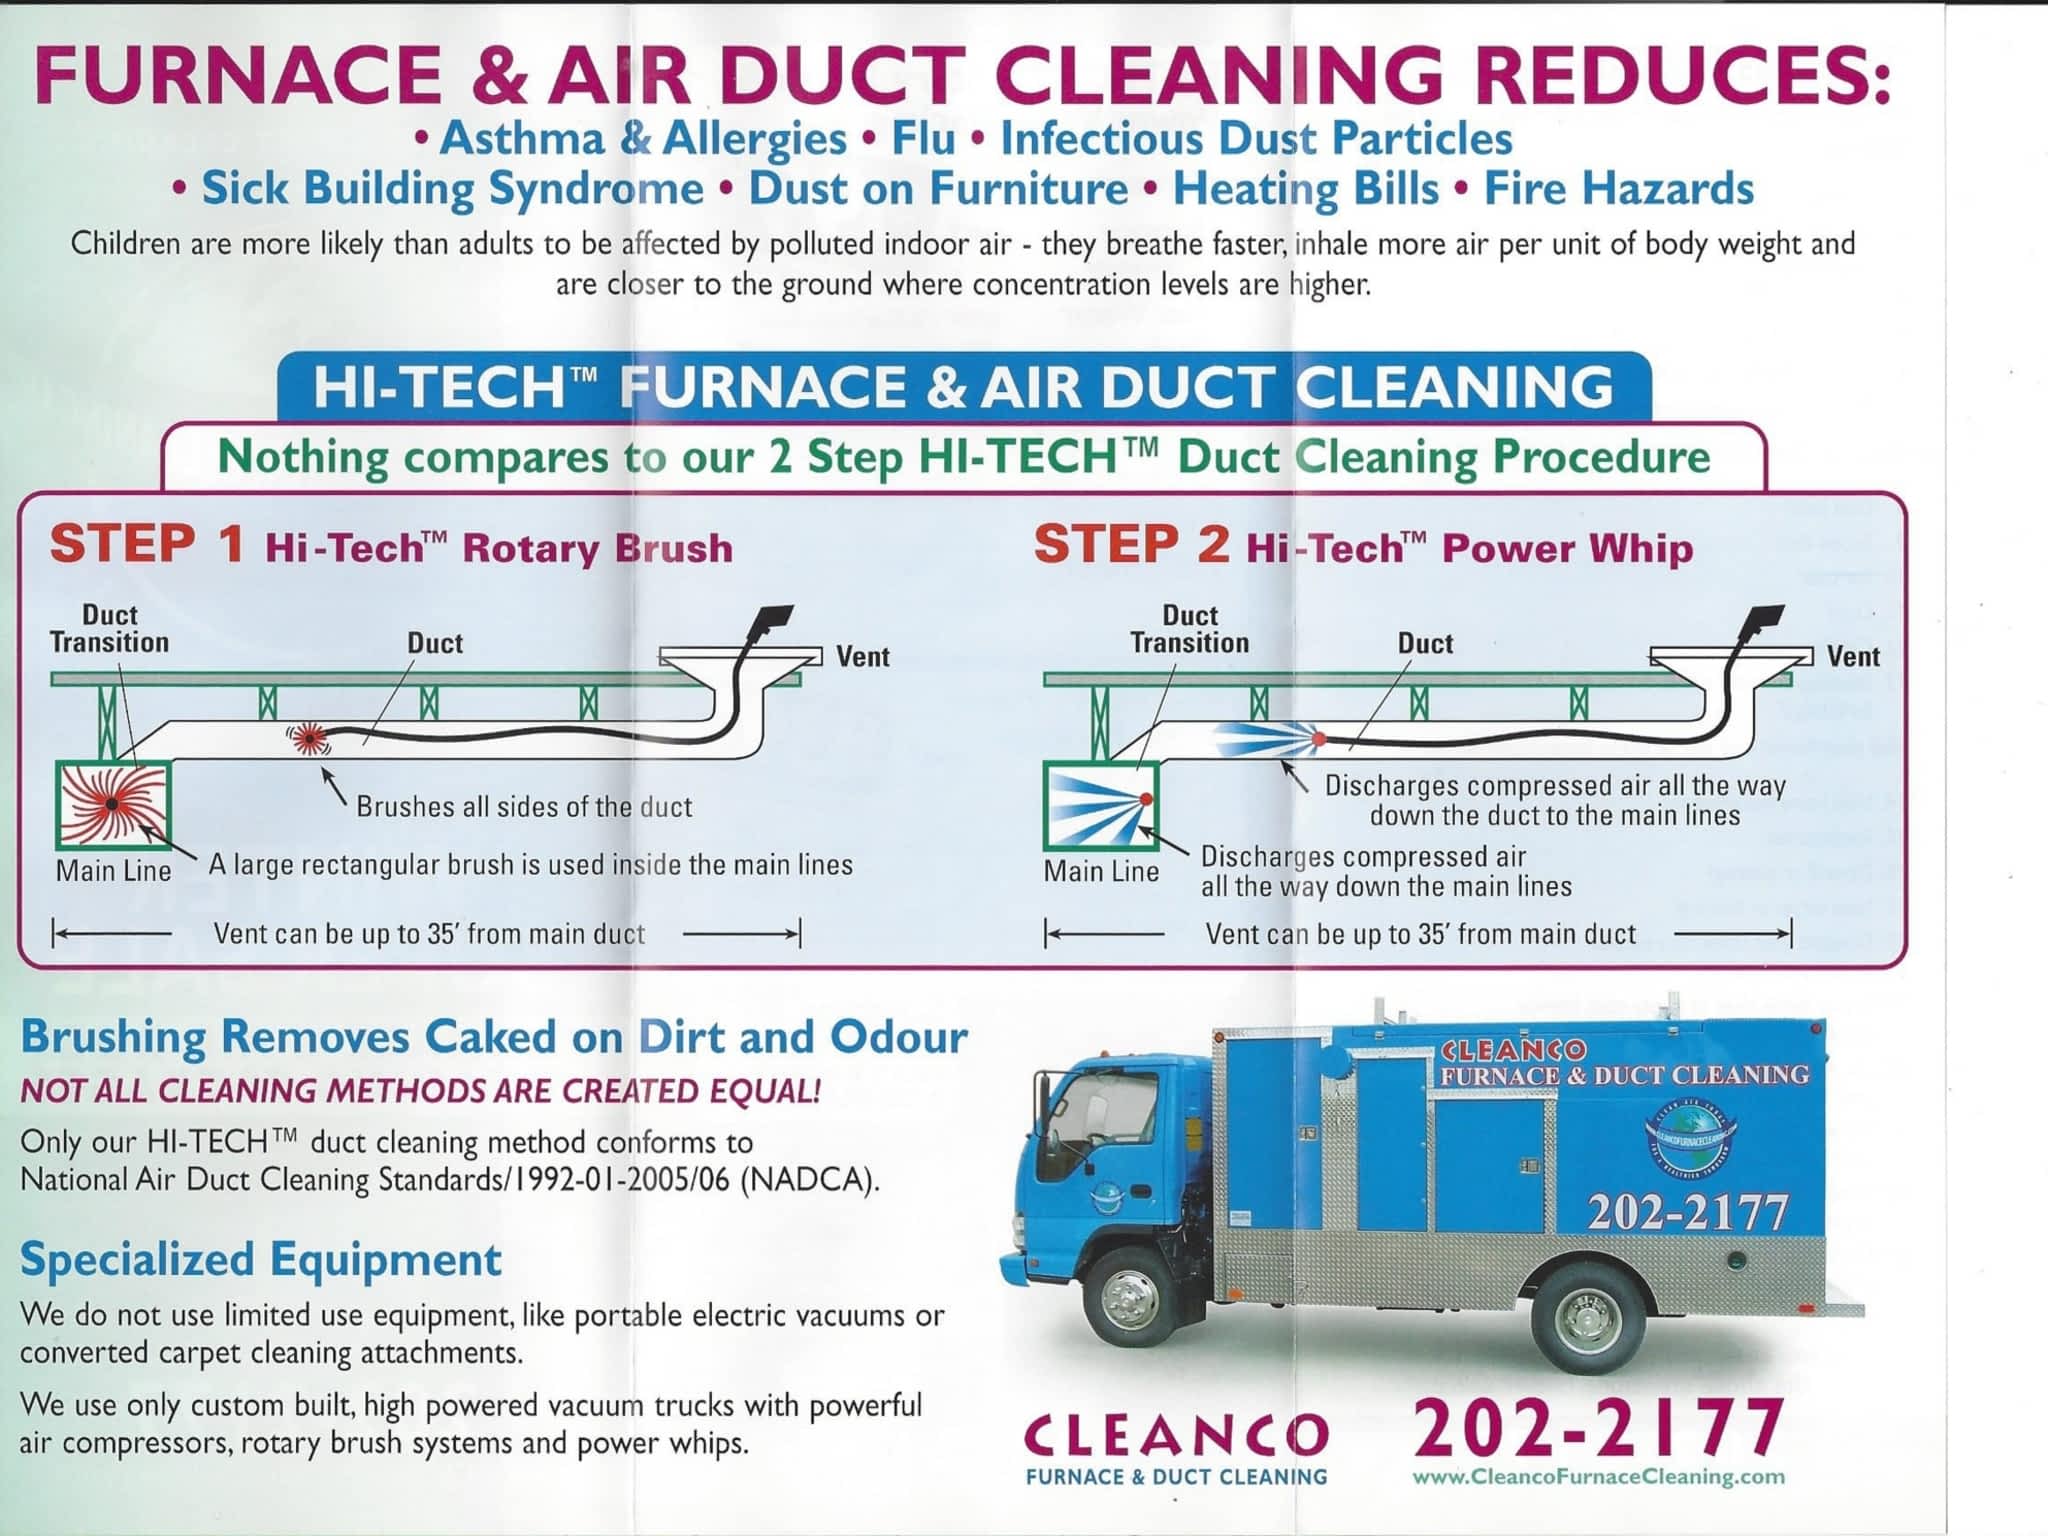 photo Cleanco Furnace & Duct Cleaning